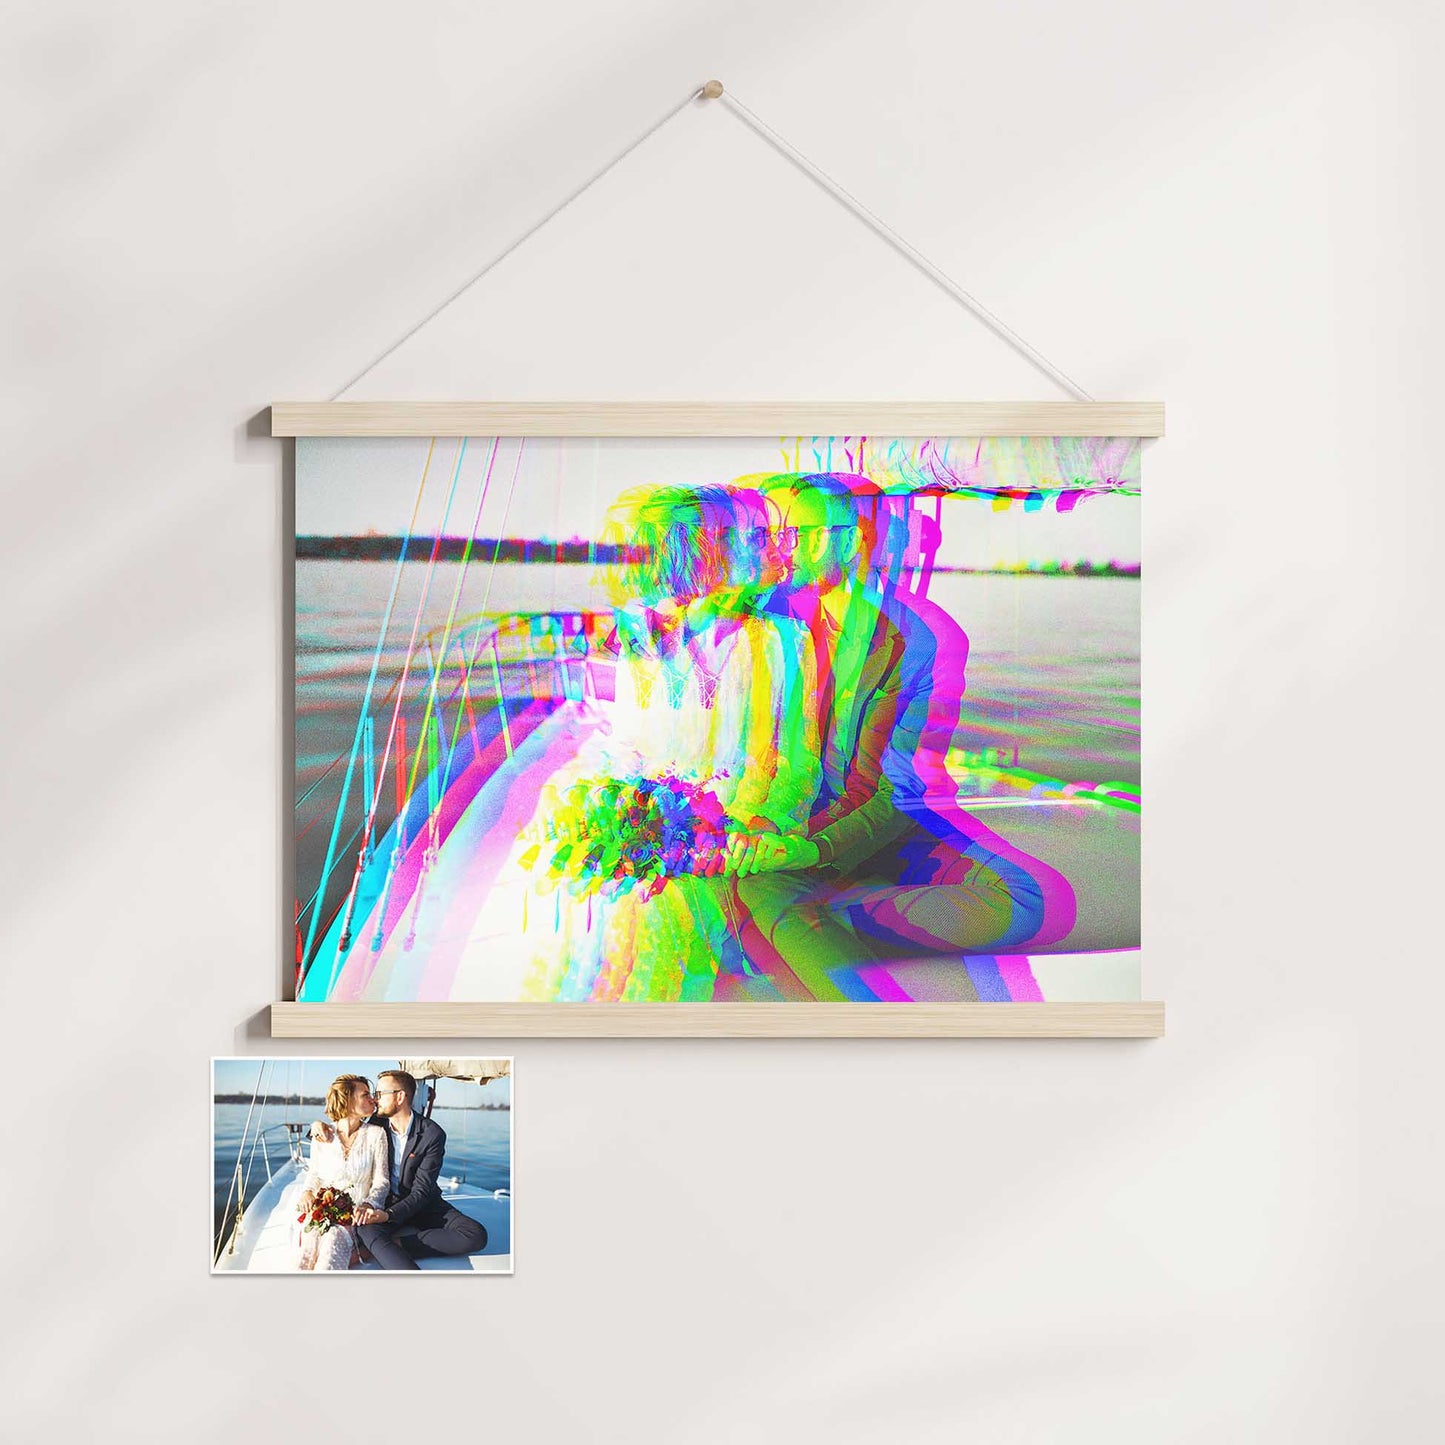 Elevate your interior with the Personalised Anaglyph 3D Poster Hanger. This eye-catching wall art boasts a mesmerizing 3D effect, blending vibrant purple and green hues for a visually striking display. Its sleek and minimalist design